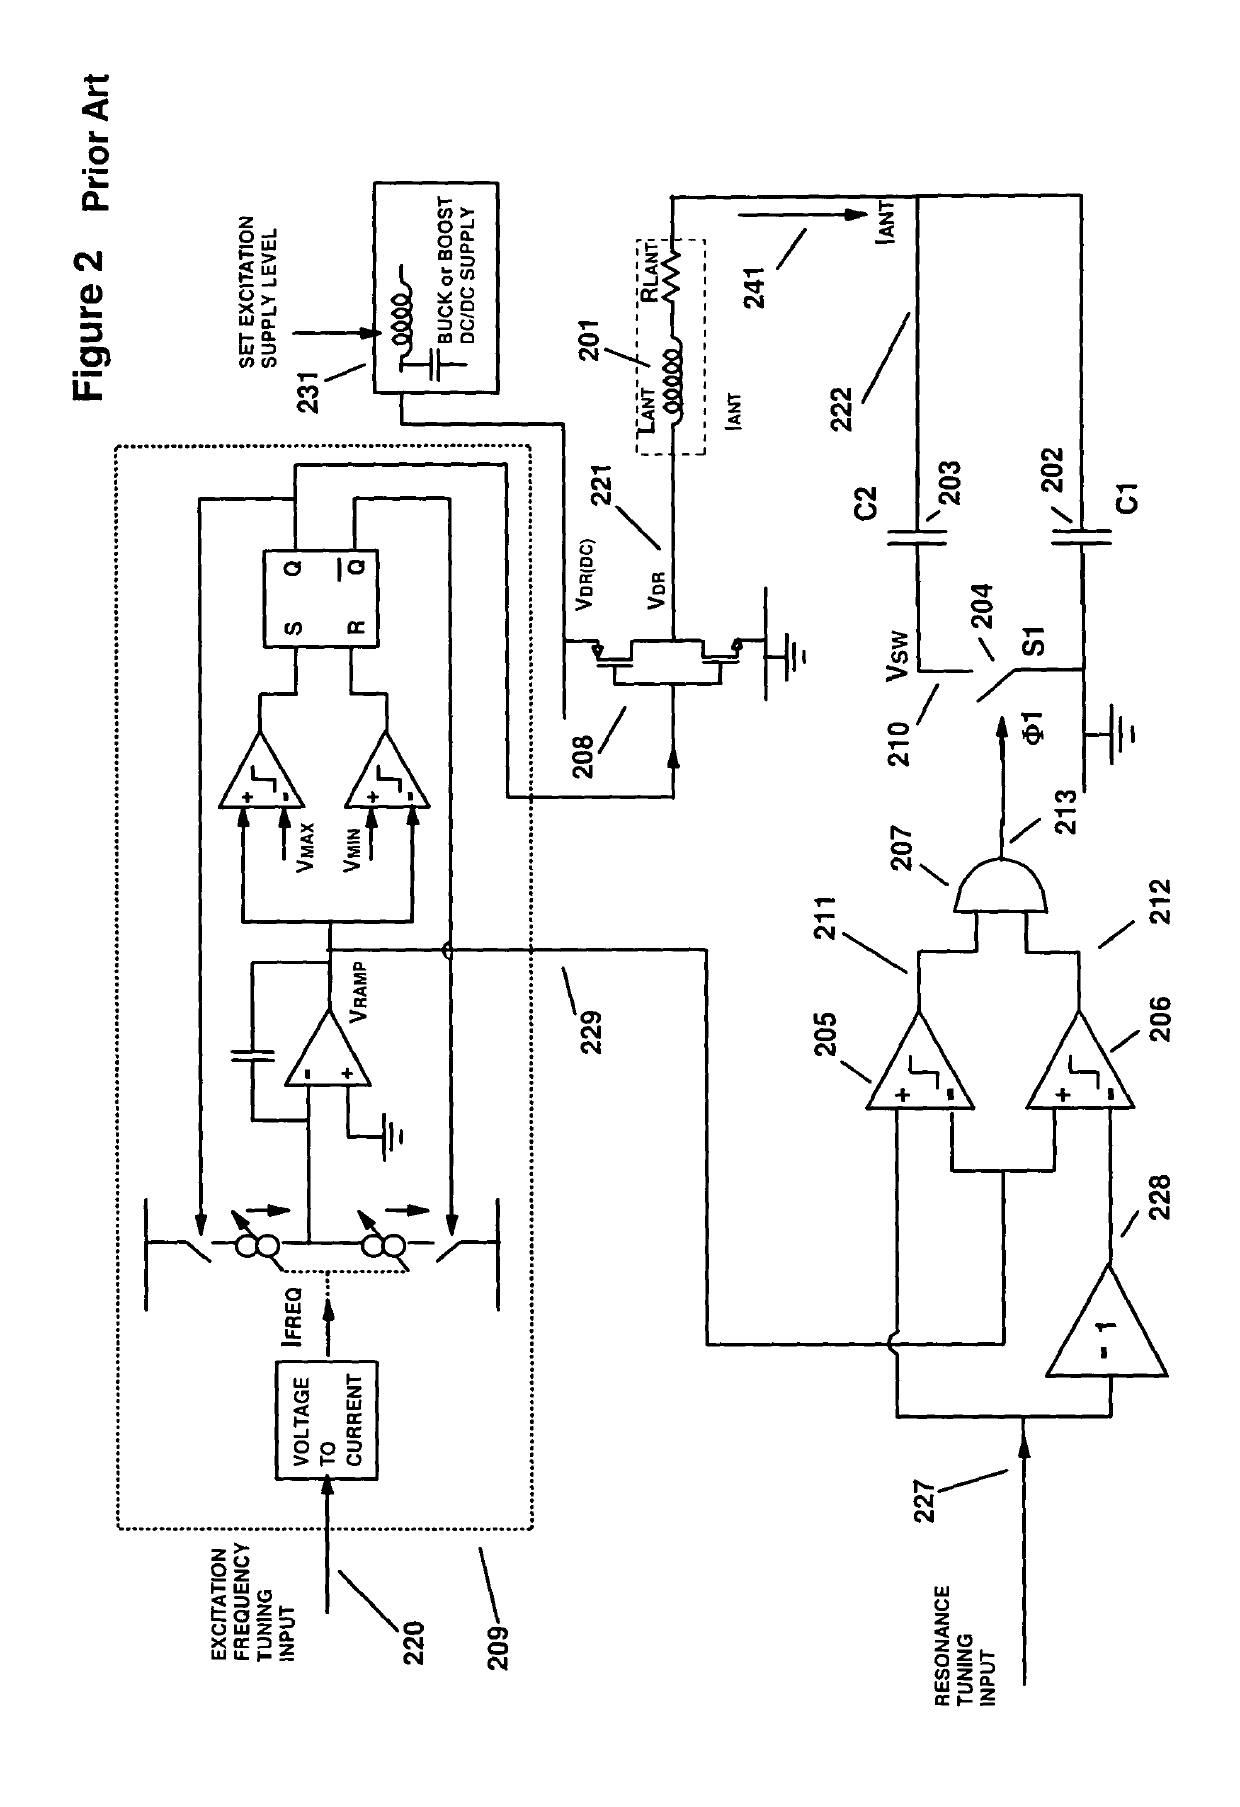 Electronic tuning system